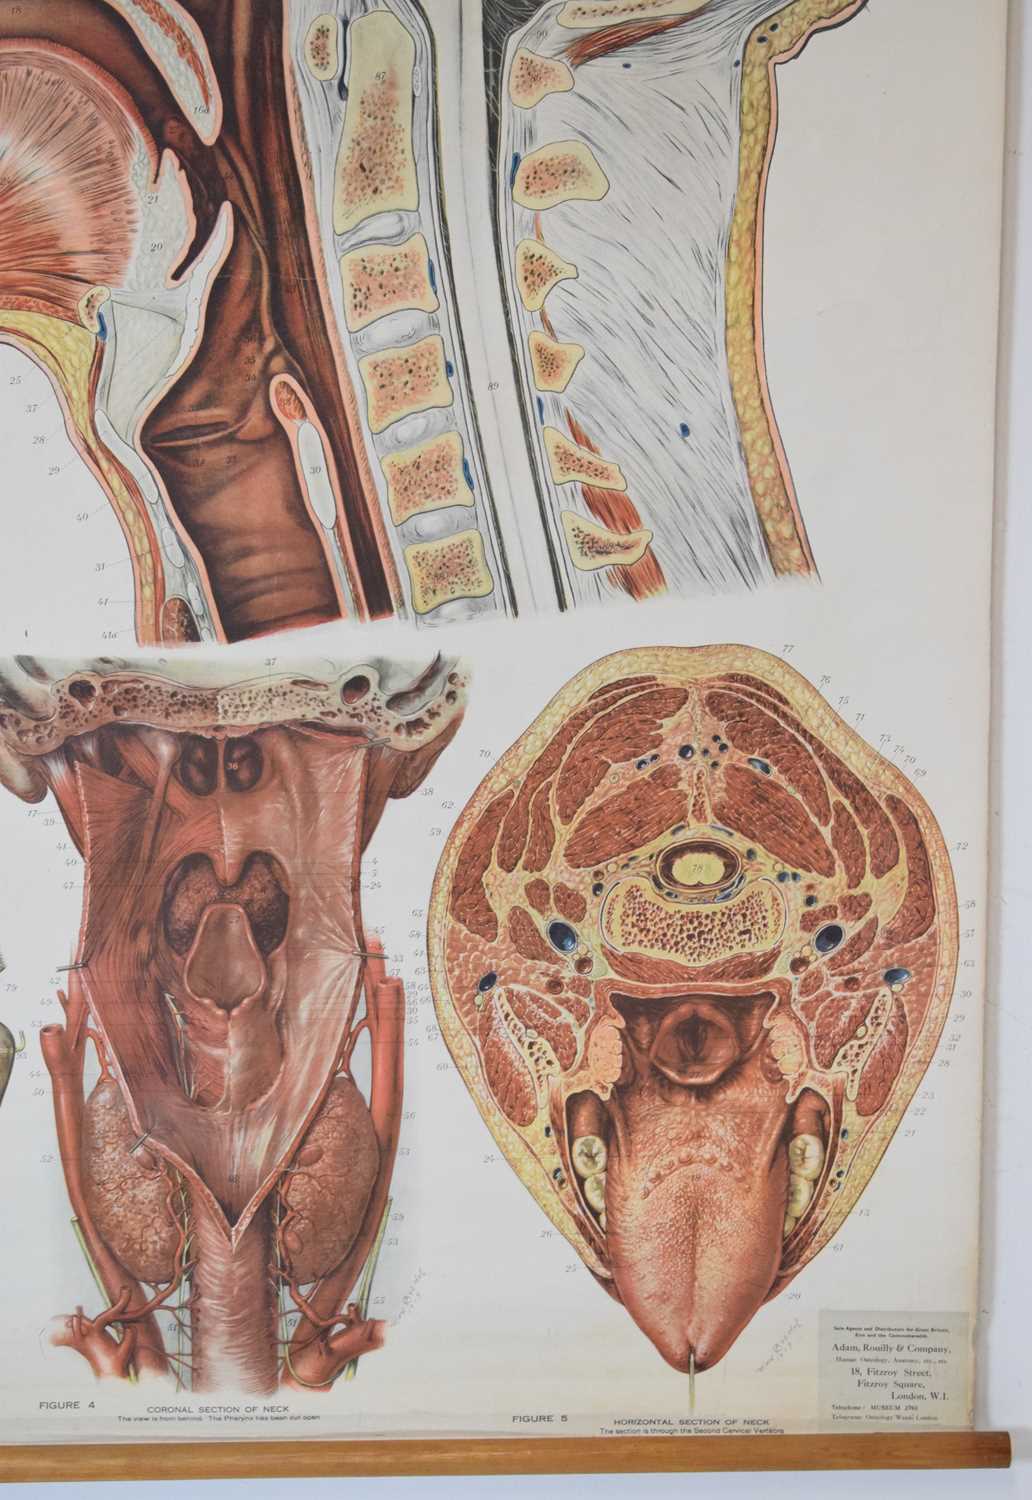 Adam Rouilly & Co Ltd - American Frohse Anatomical Chart - Image 5 of 8